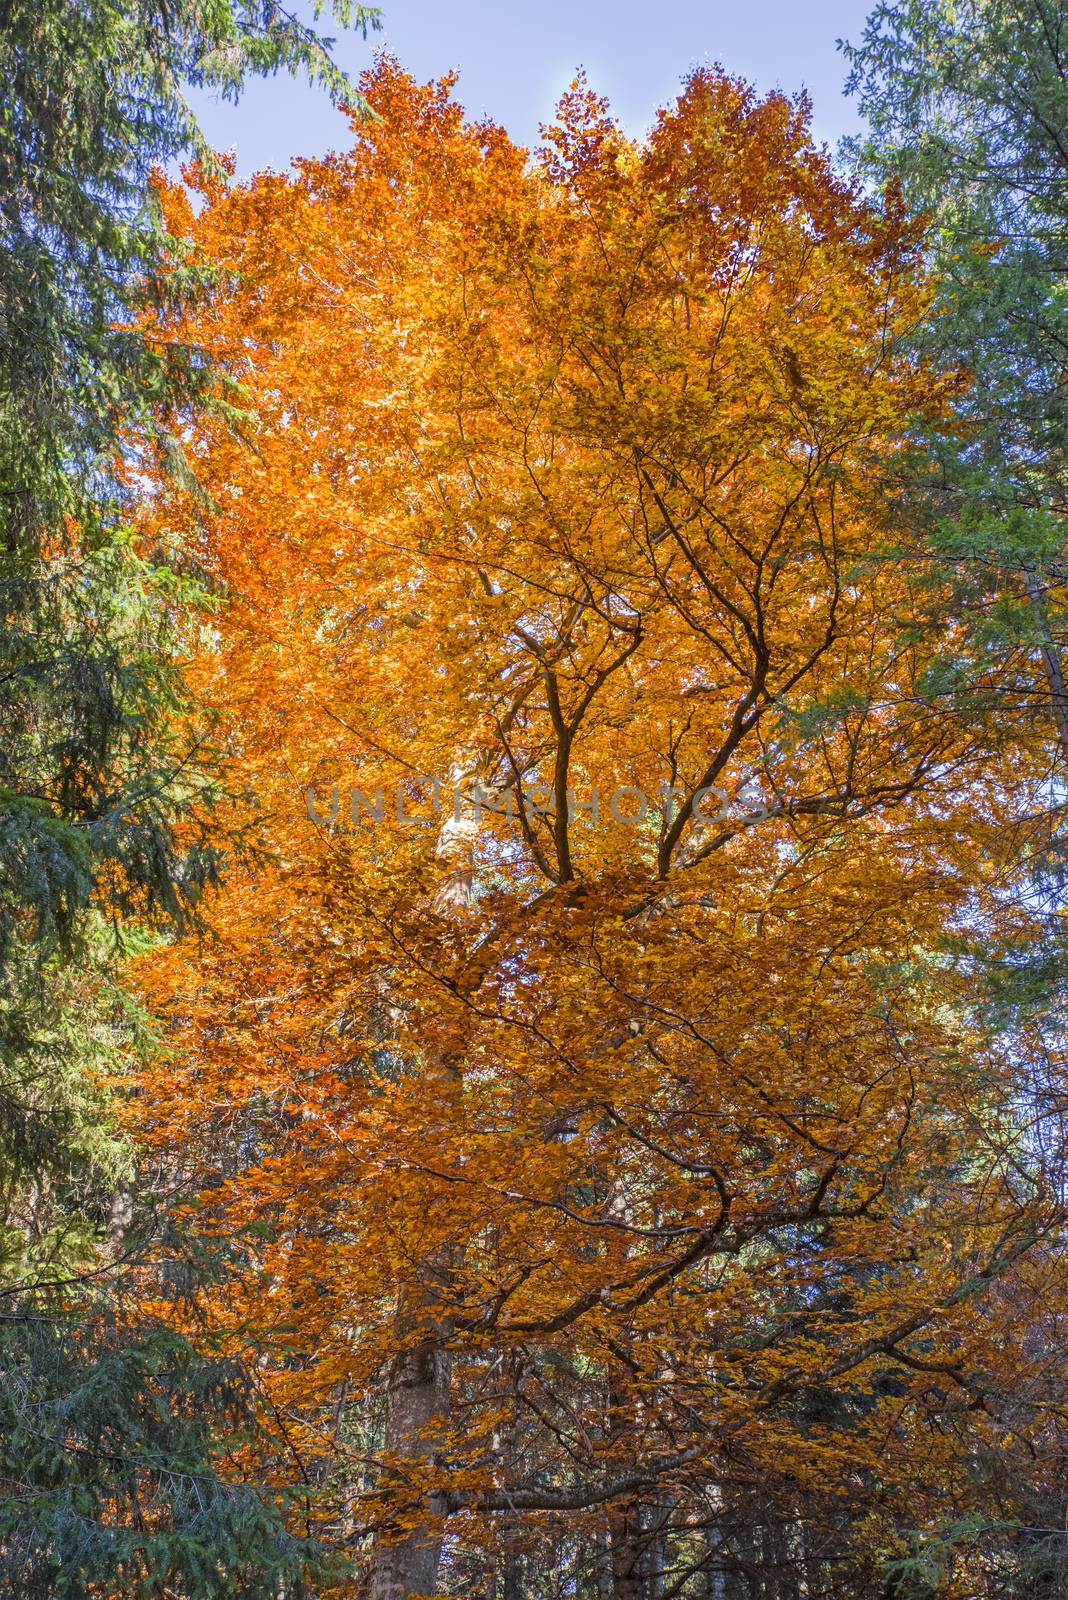 Autumn scene in the forest, golden leaves tree in october